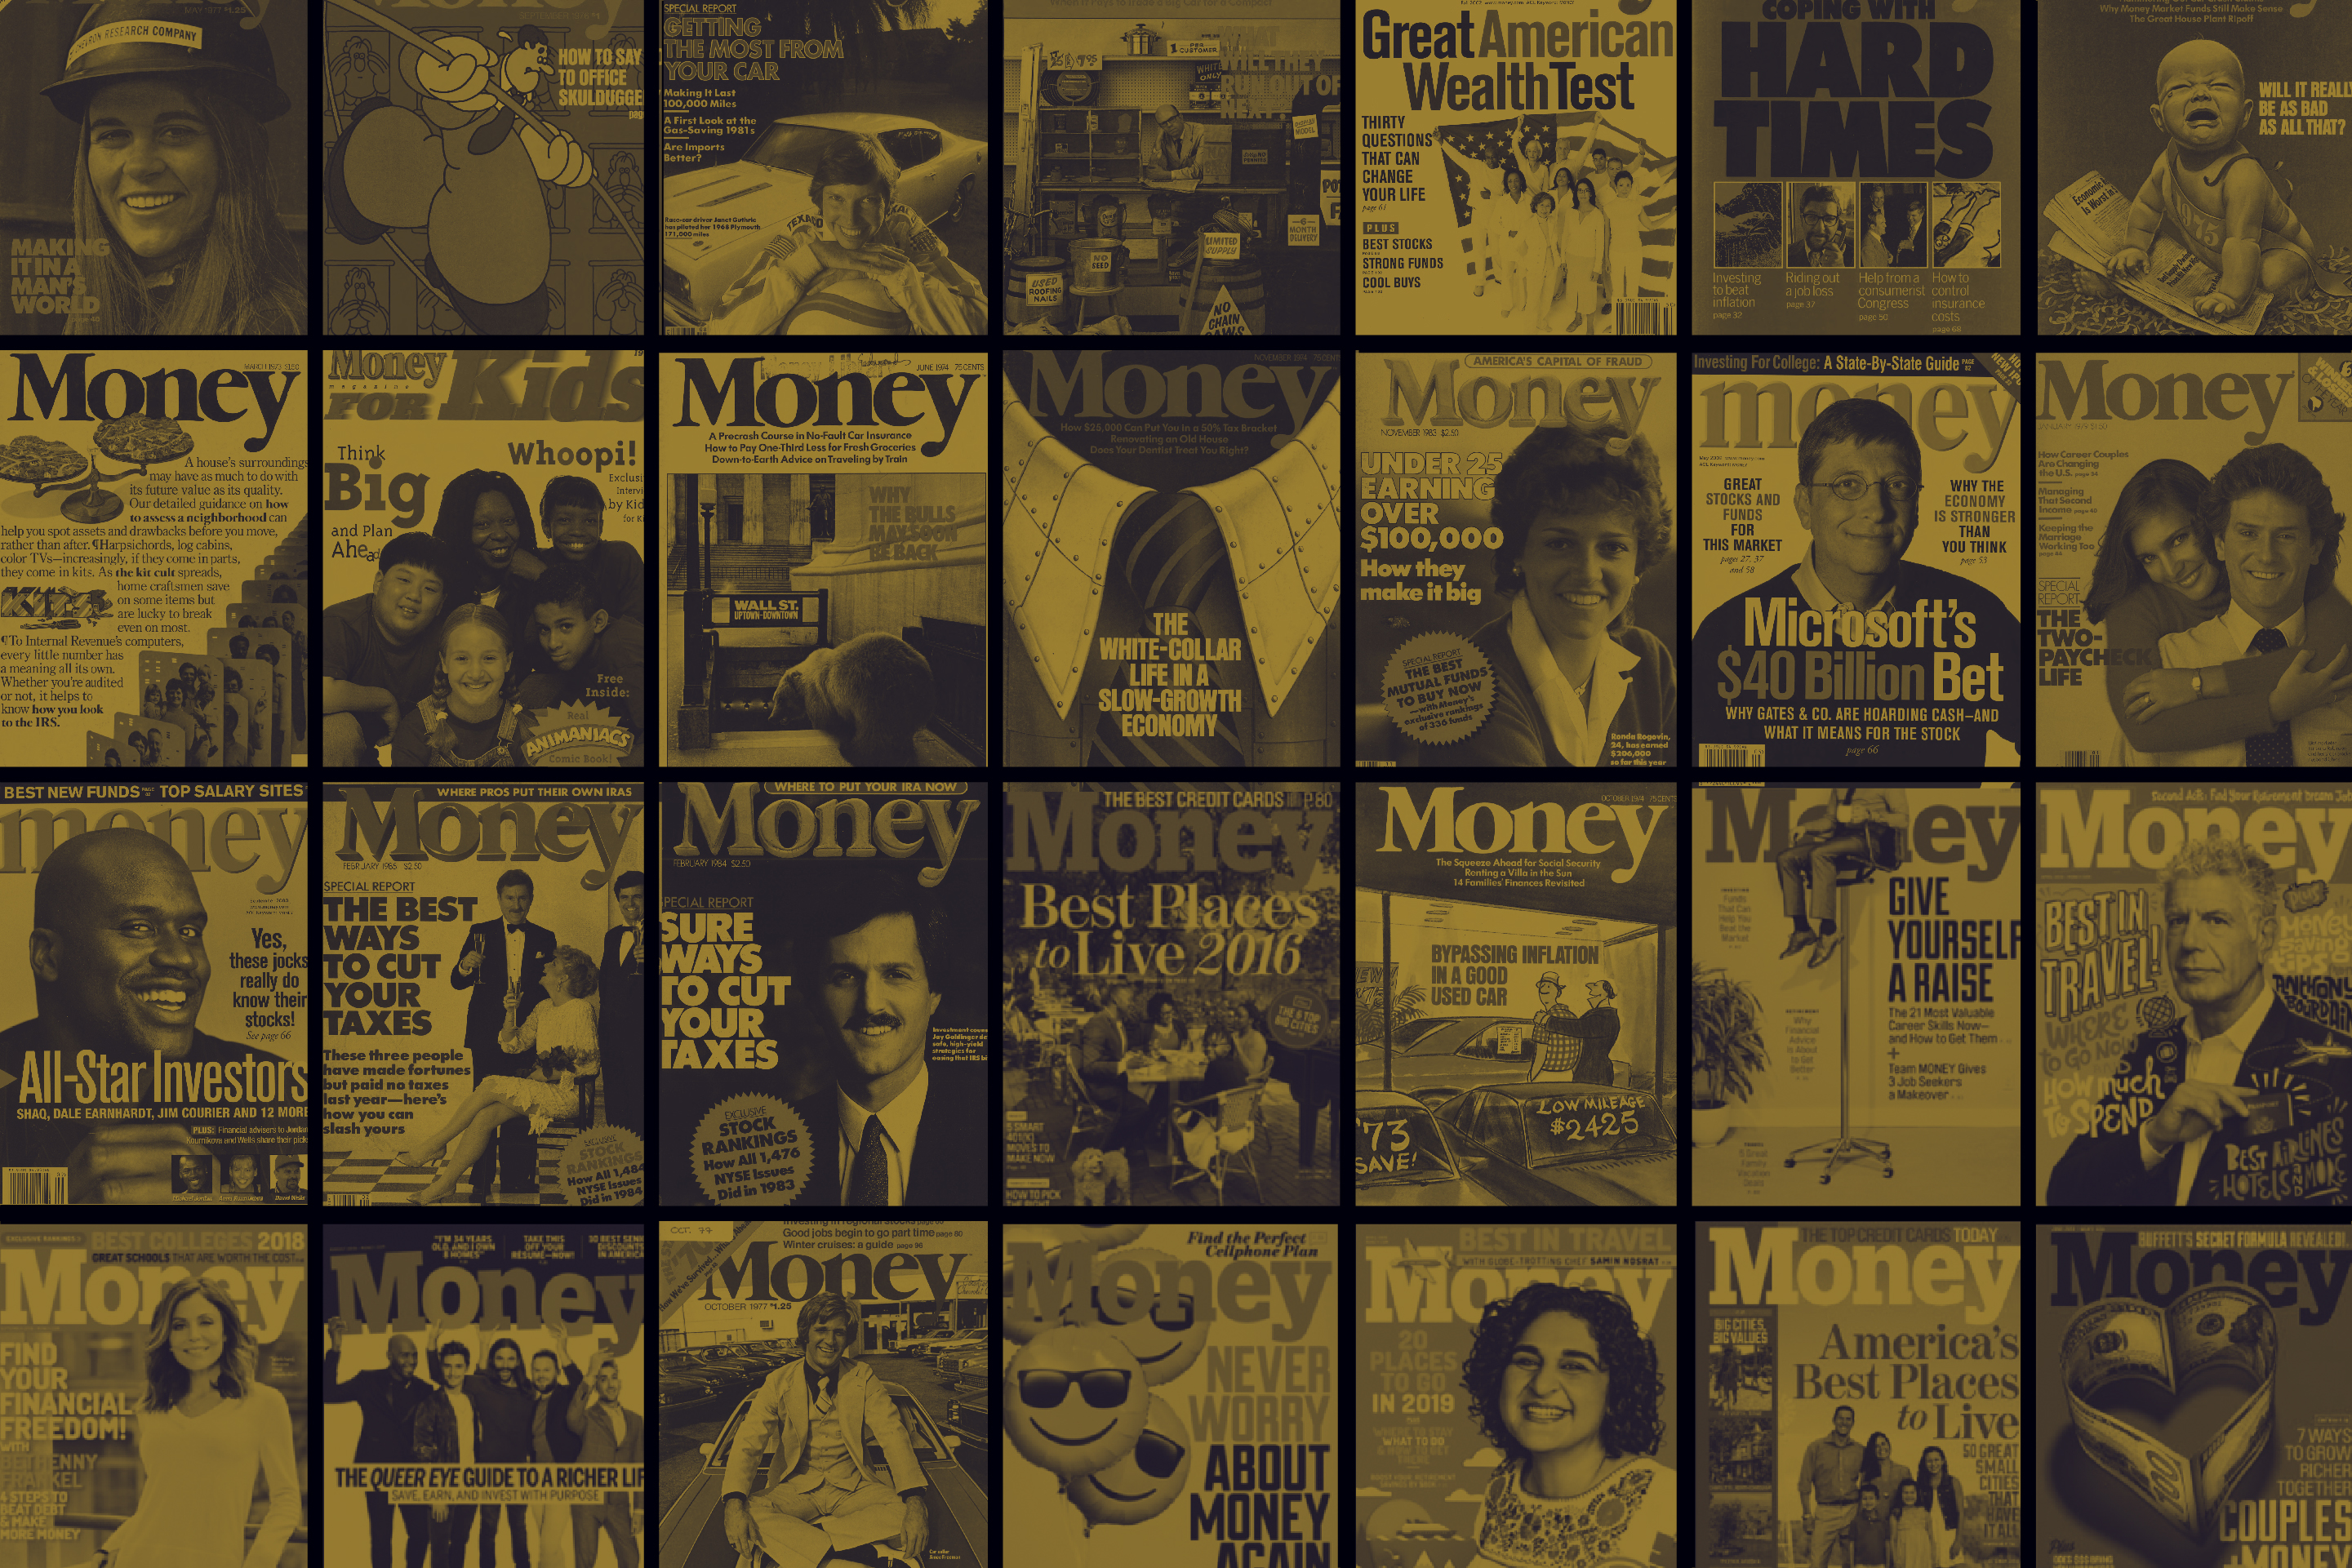 Introducing Money Archives, a Look Into Our Storied Past